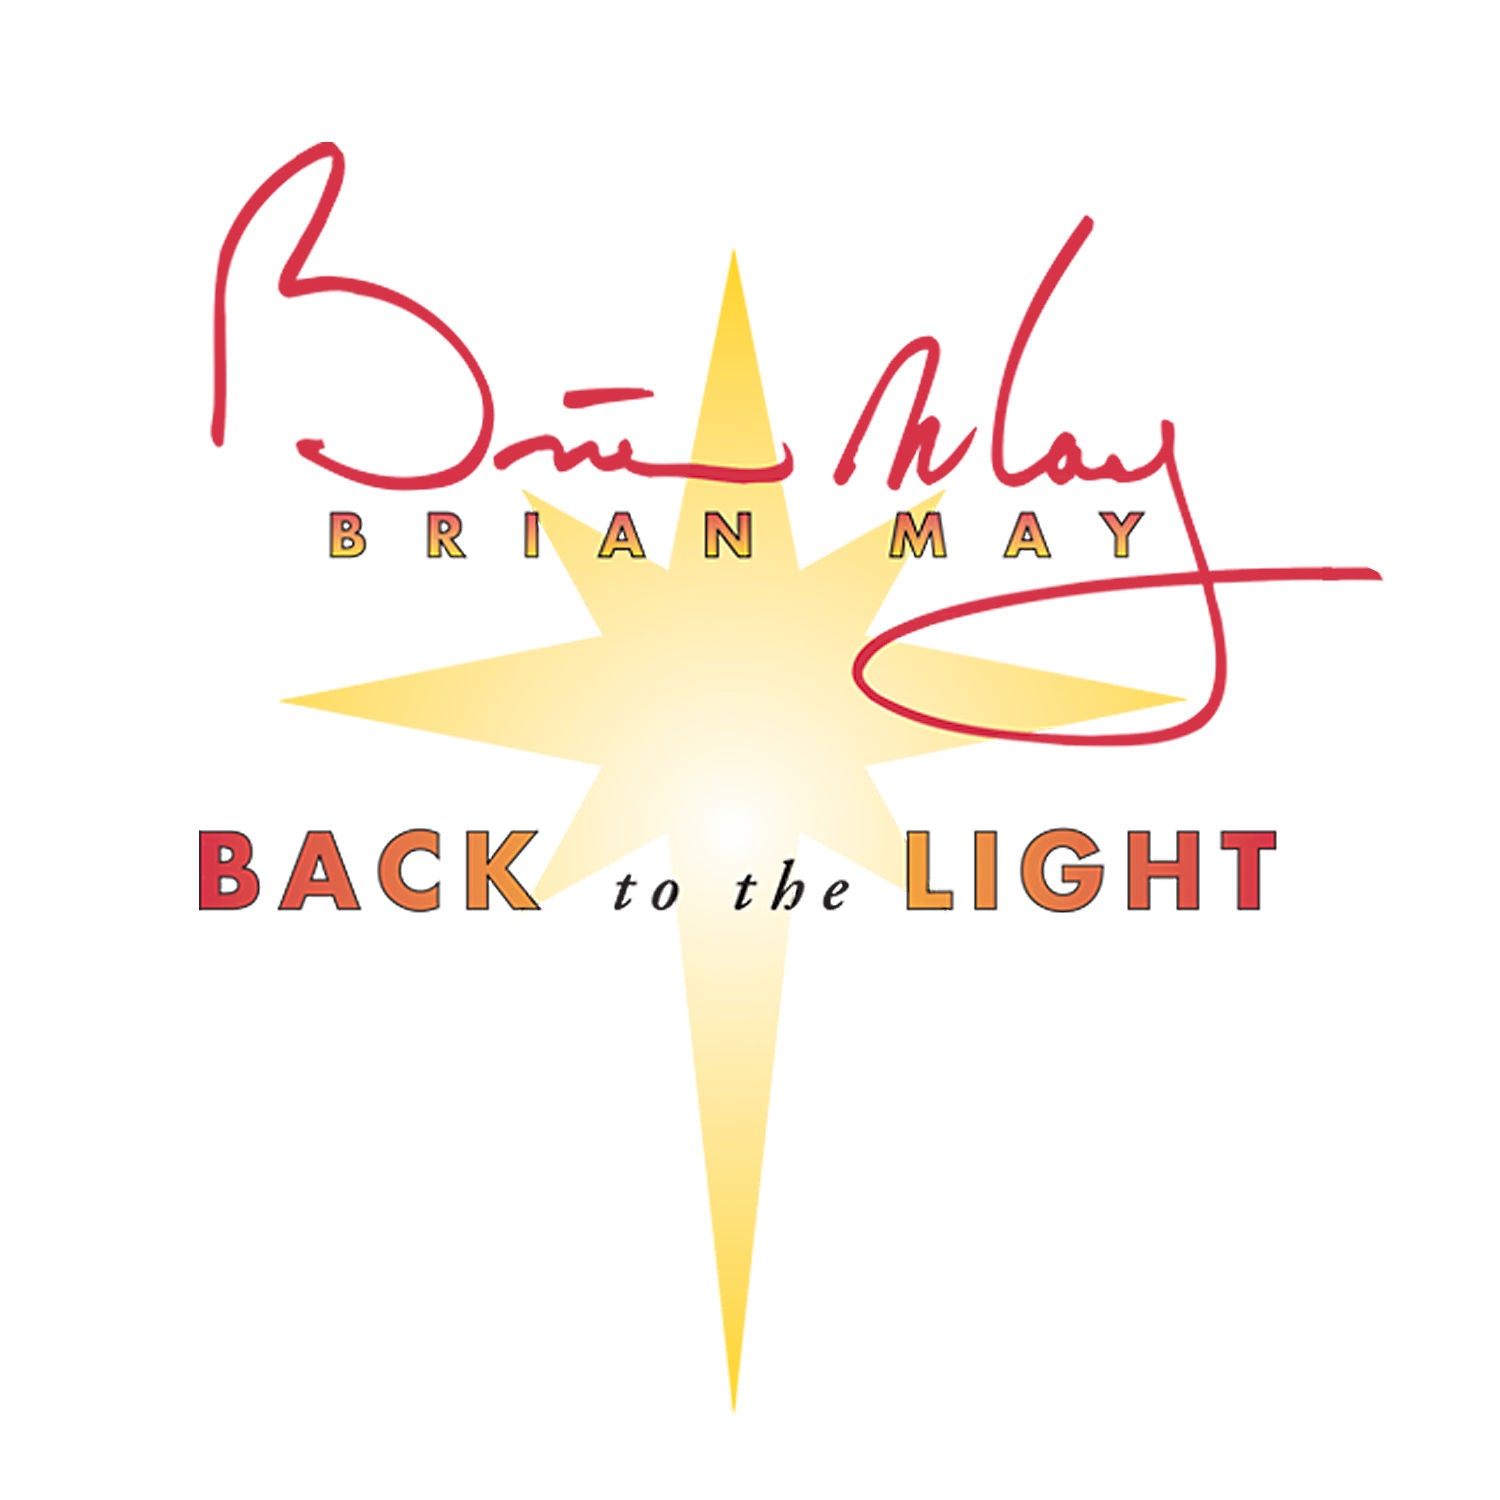 Brian May - Back To The Light Hoodie White